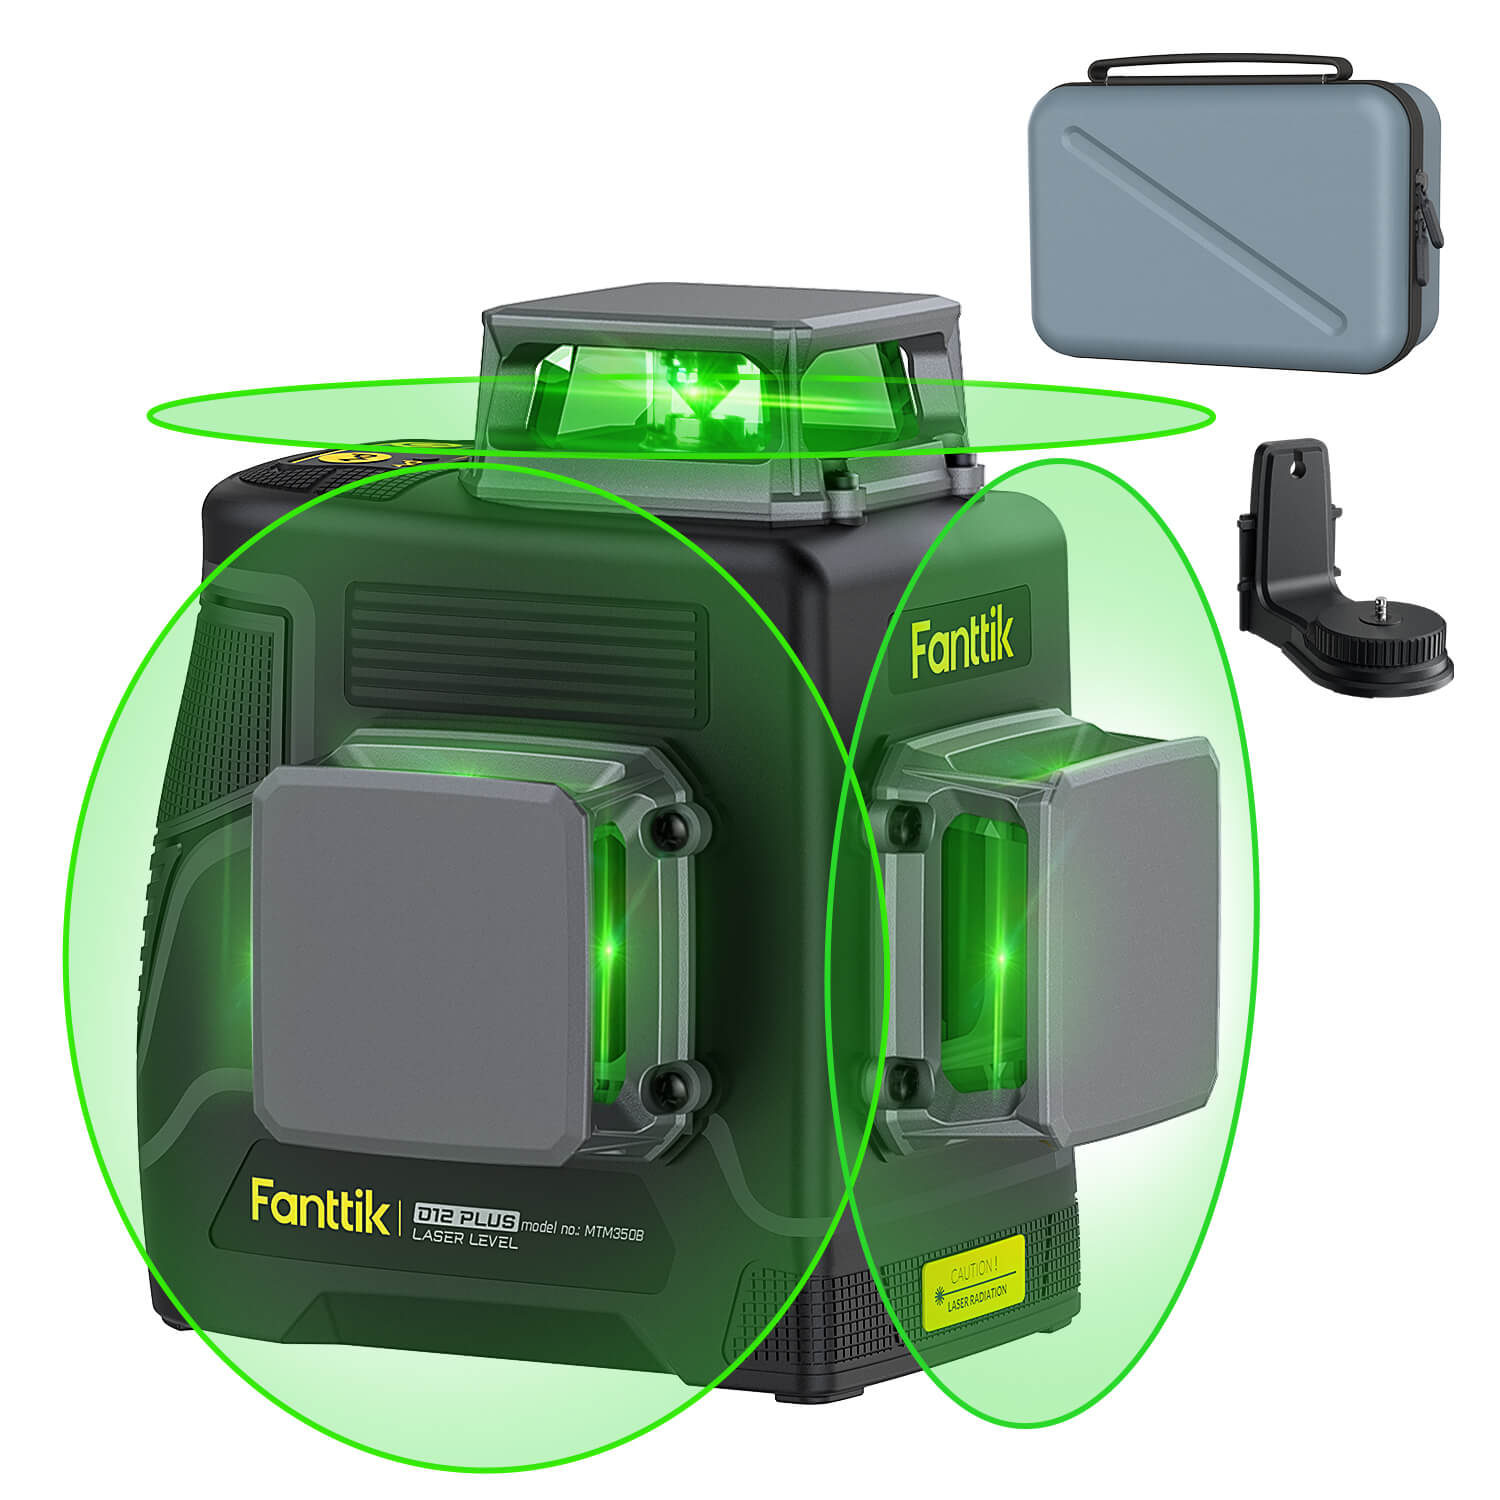 Fanttik D12 PLUS Laser Level 3×360°, Self-leveling Green Cross Line, 12 Lines for Construction and Picture Hanging, 5200mAh Battery Rechargeable, 200ft Outdoor Pulse Mode, Class II (<1 mW max output)